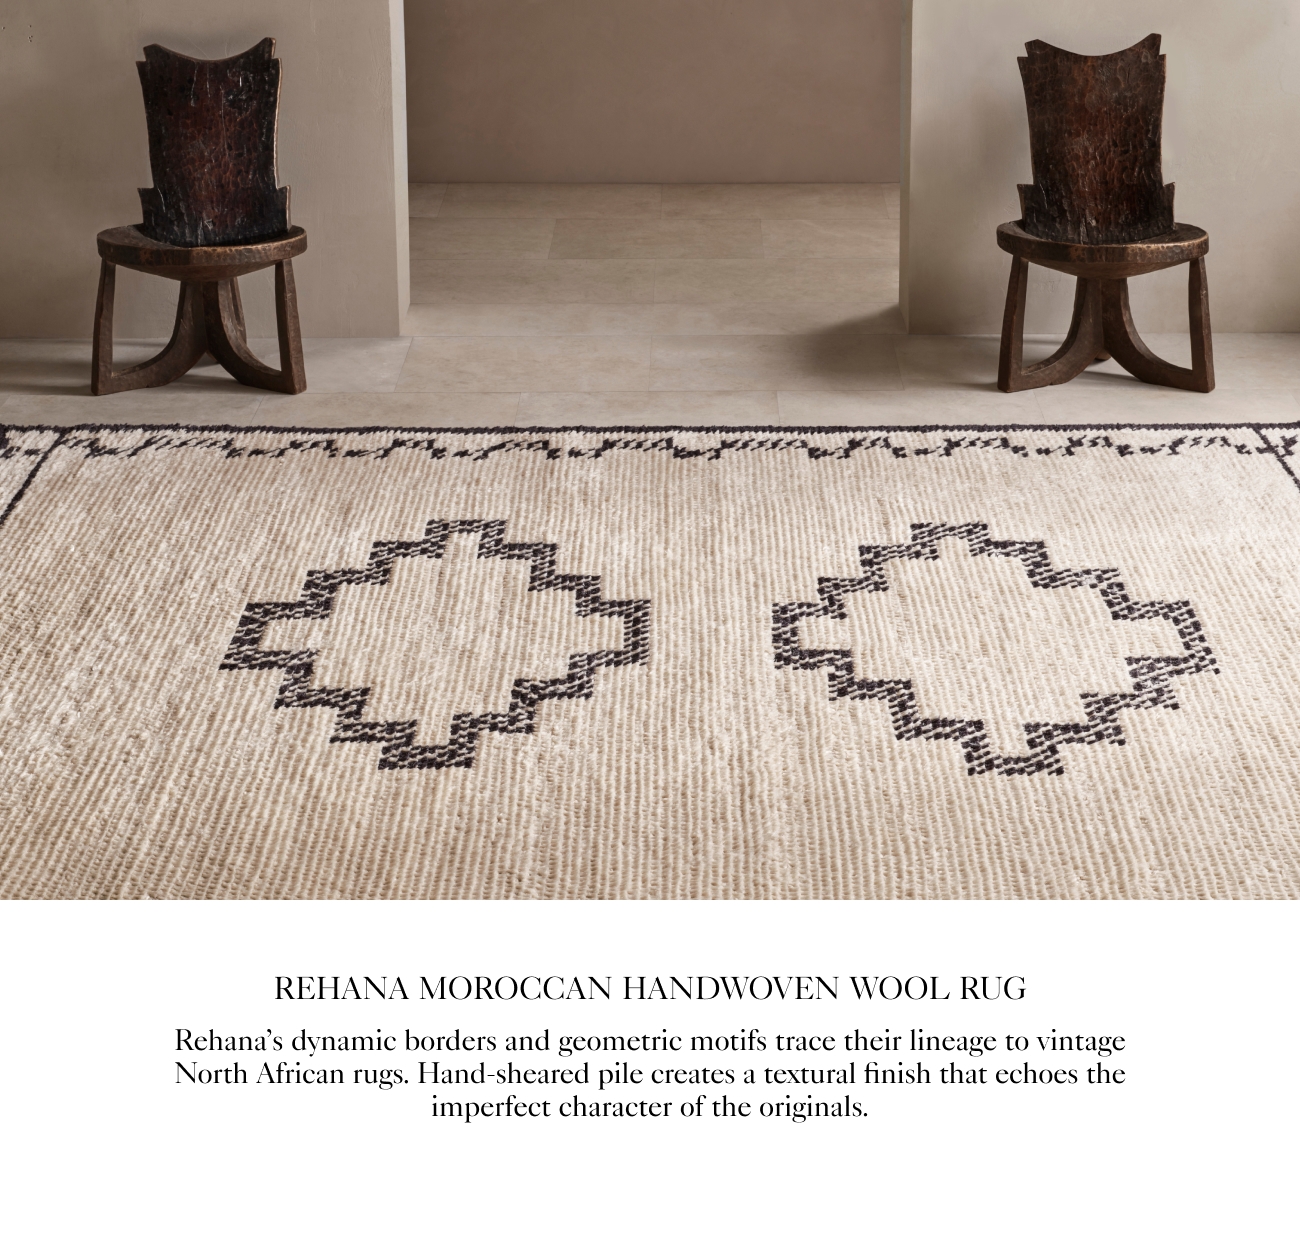  REHANA MOROCCAN HANDWOVEN WOOL RUG Rehanas dynamic borders and geometric motifs trace their lincage to vintage North African rugs. Hand-sheared pile creates a textural finish that echoes the imperfect character of the originals. 